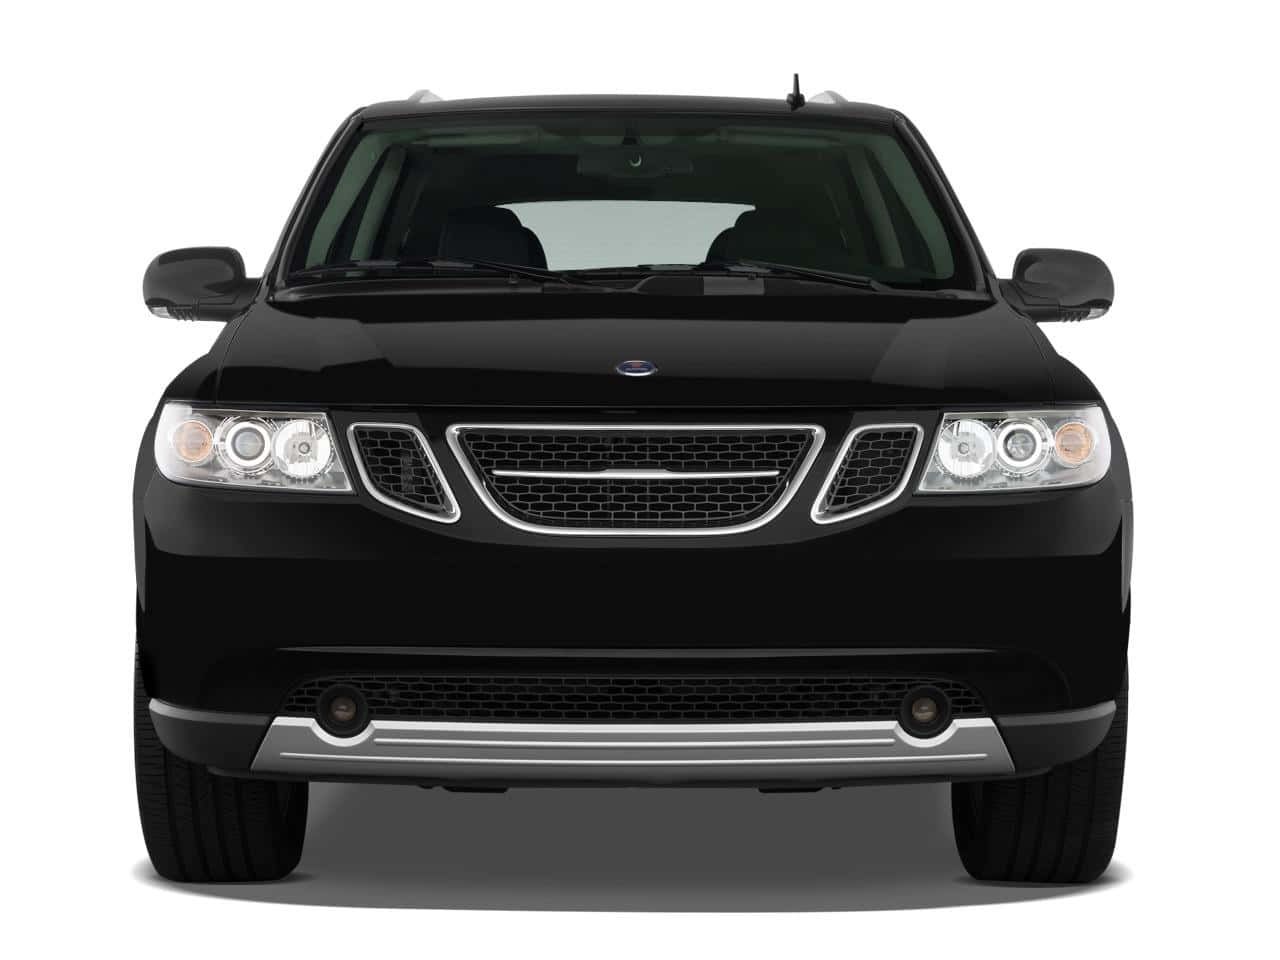 Majestic Saab 9-7x Gliding On The Highway Wallpaper